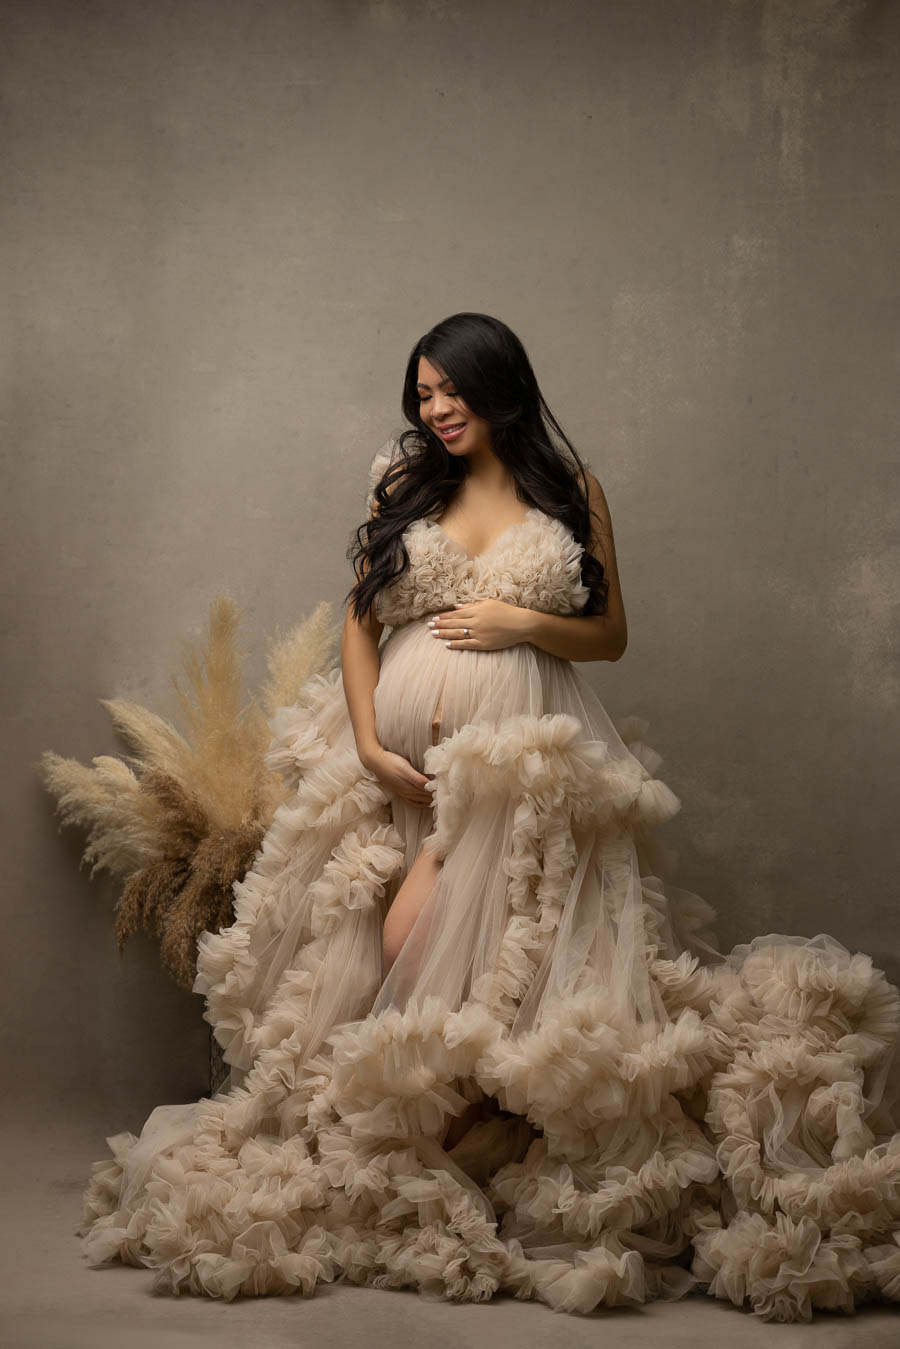 75 Classic Maternity Shoot Dresses Guides You Need To See 2022  Girl  maternity pictures, Studio maternity shoot, Maternity photoshoot outfits